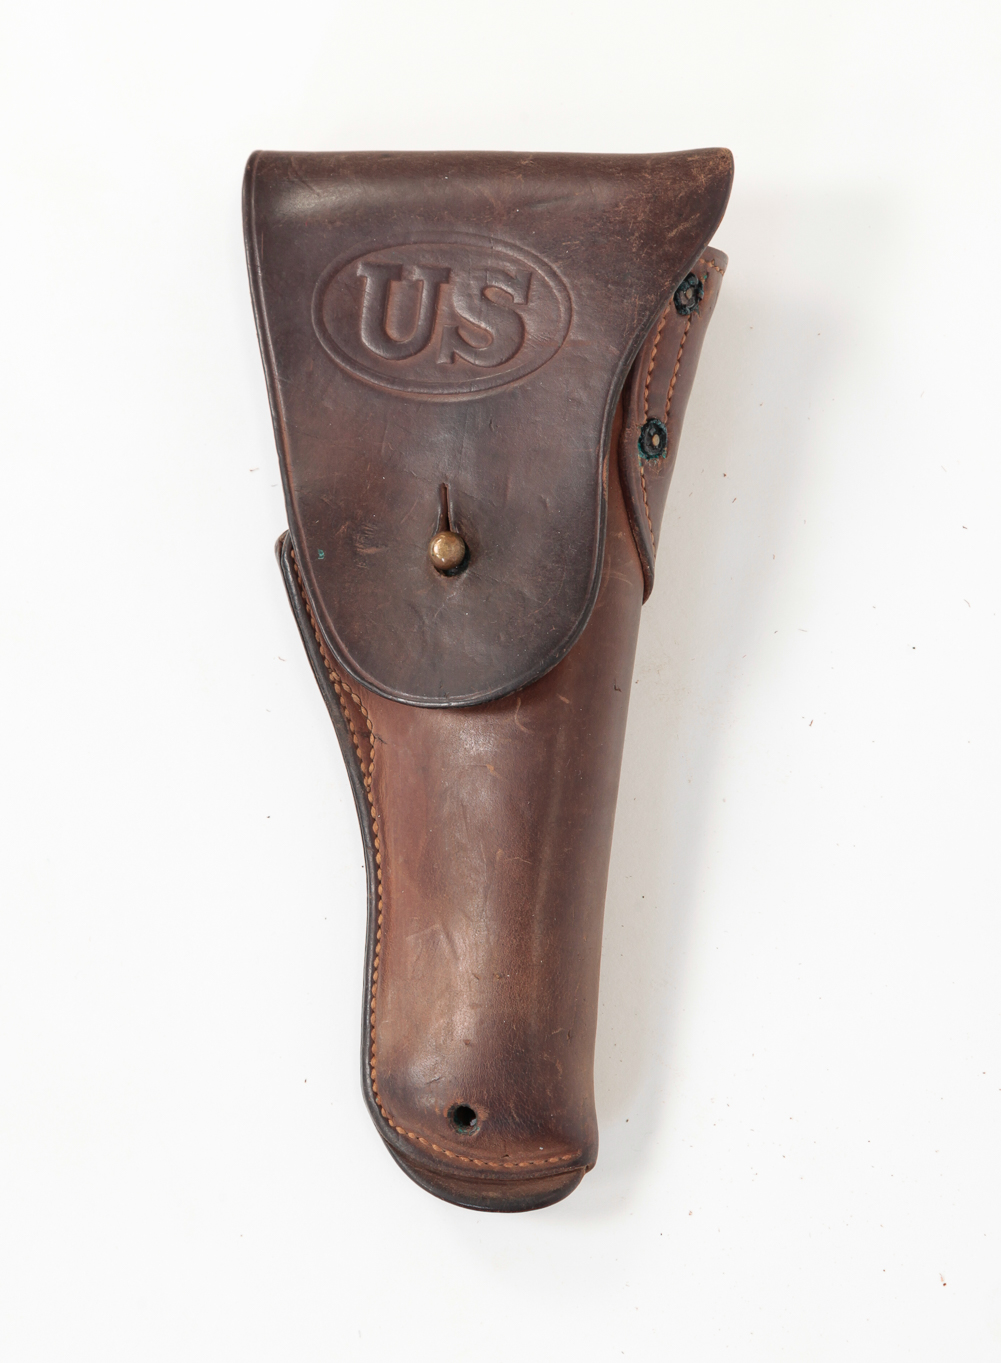 CLINTON 1913 U S LEATHER HOLSTER 31a868